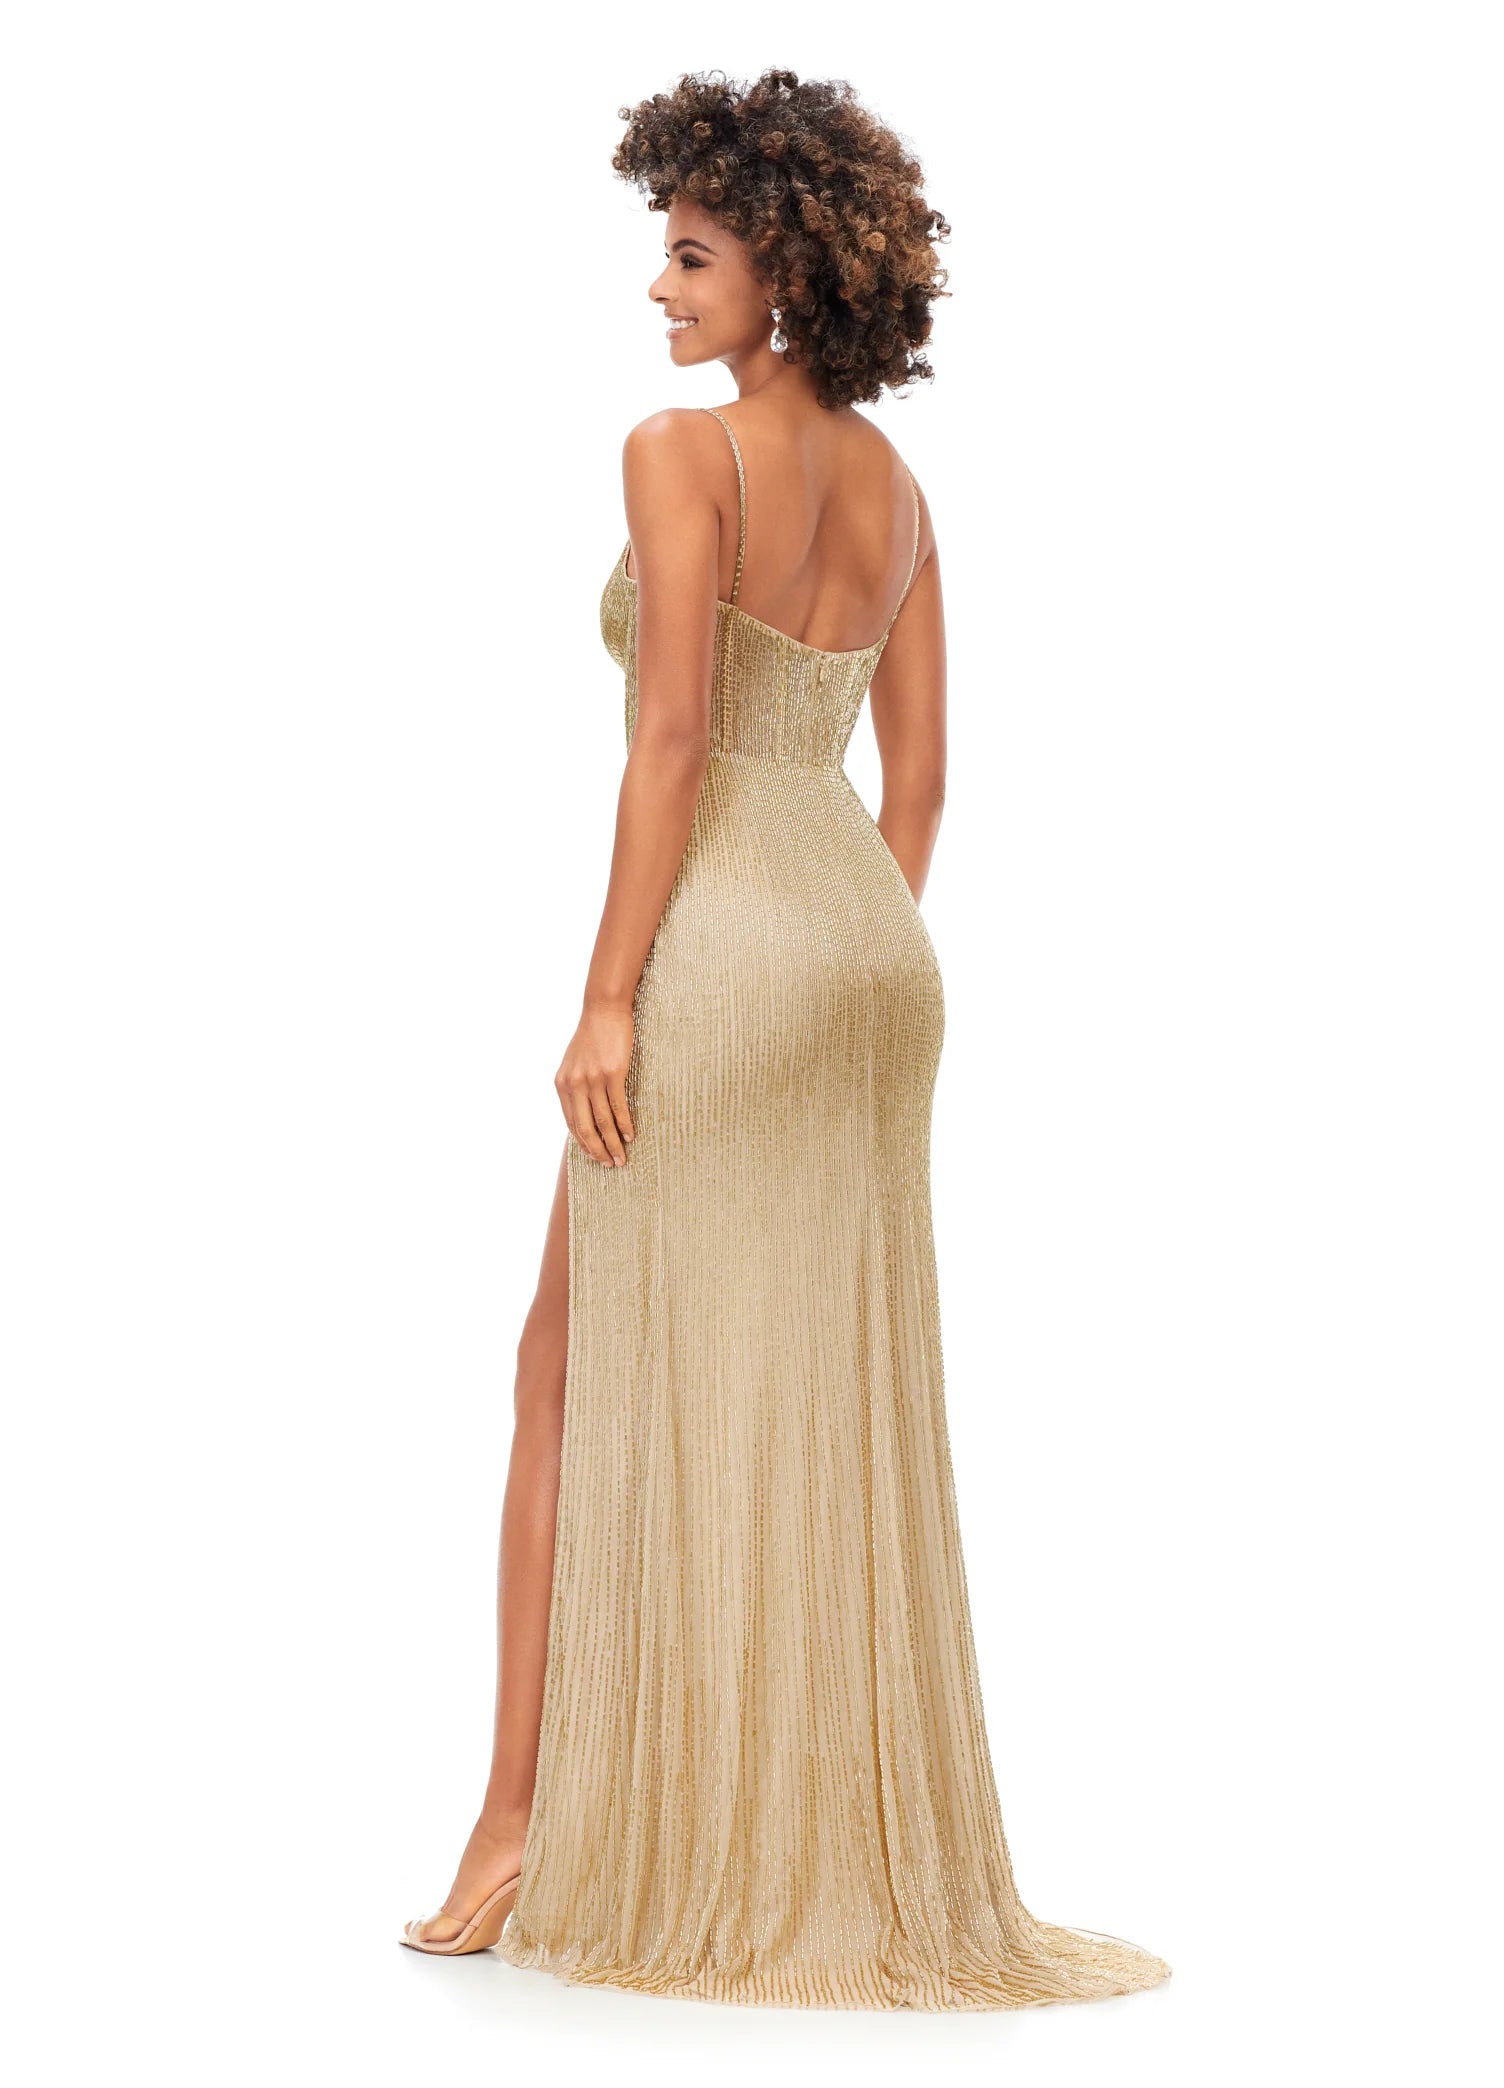 Ashley Lauren 11369 This liquid beaded style features an exposed bustier that is sure to accentuate your curves. The look is complete with sweep train and left leg slit. Spaghetti Straps Exposed Bustier Left Leg Slit Fully Liquid Beading Size: 2, 6  Color: GOLD